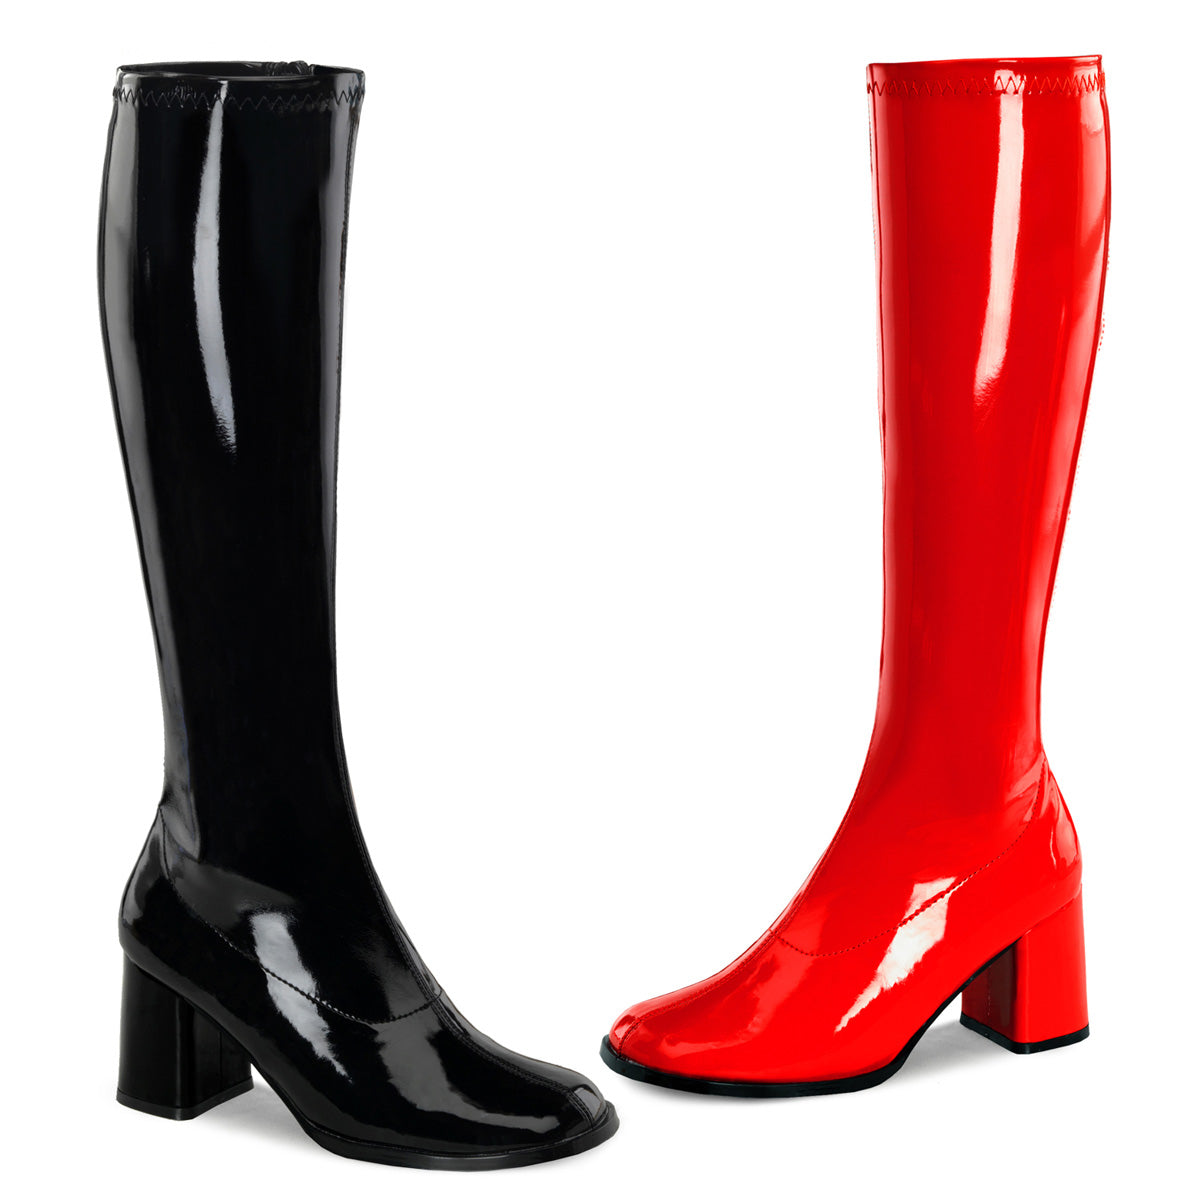 GOGO-300HQ 3 Inch Heel Black and Red Women's Boots Funtasma Costume Shoes